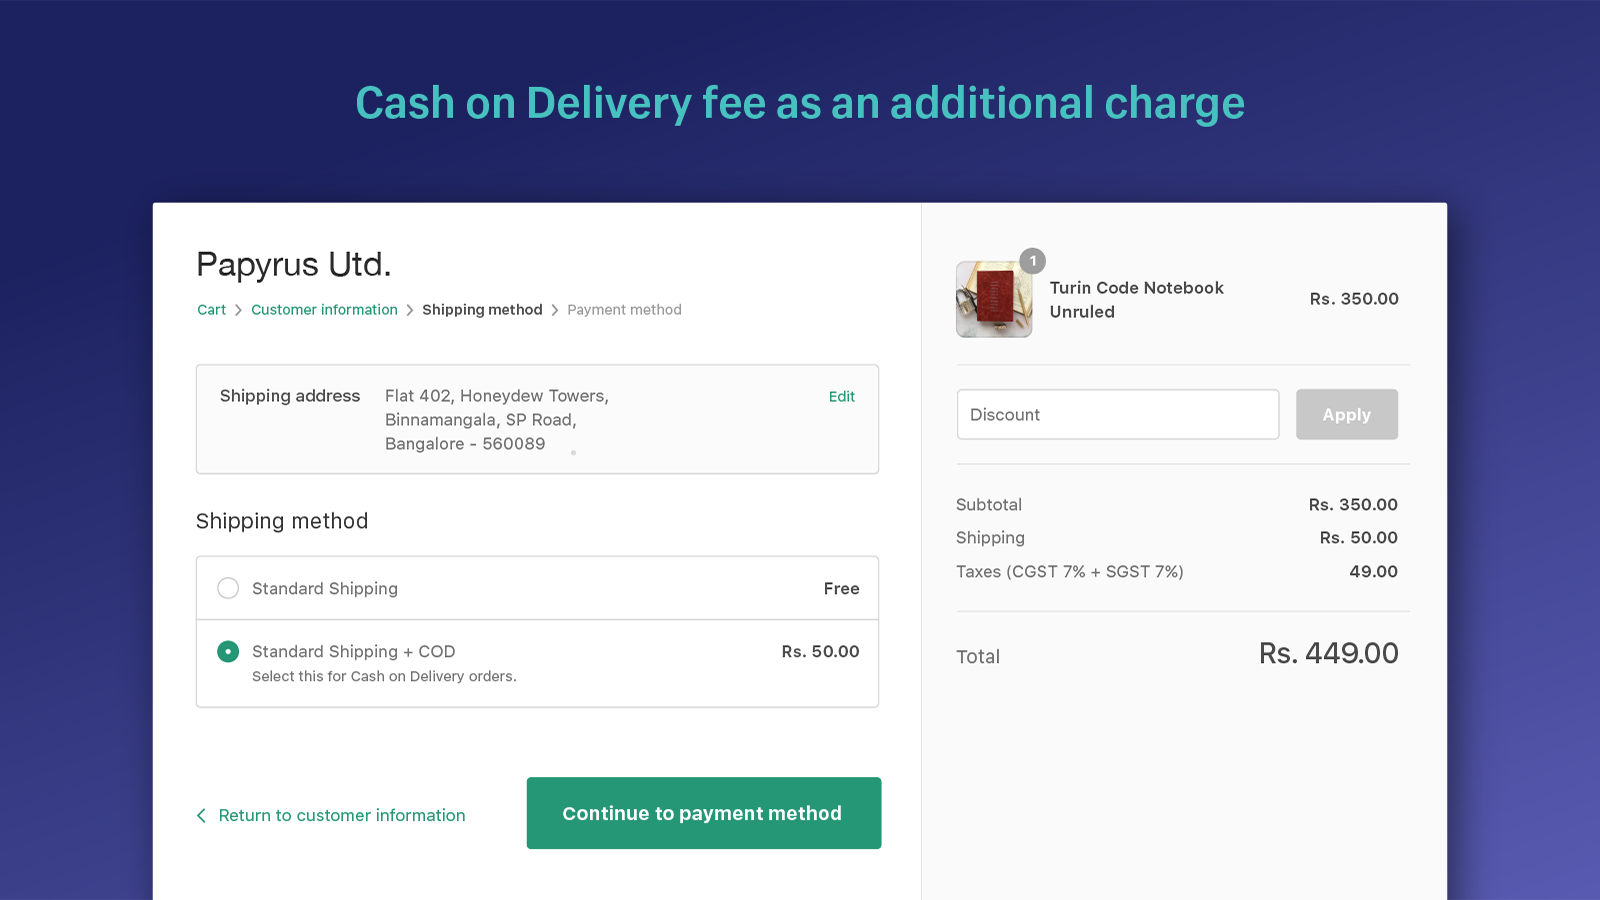 Cash on Delivery fee as an additional charge